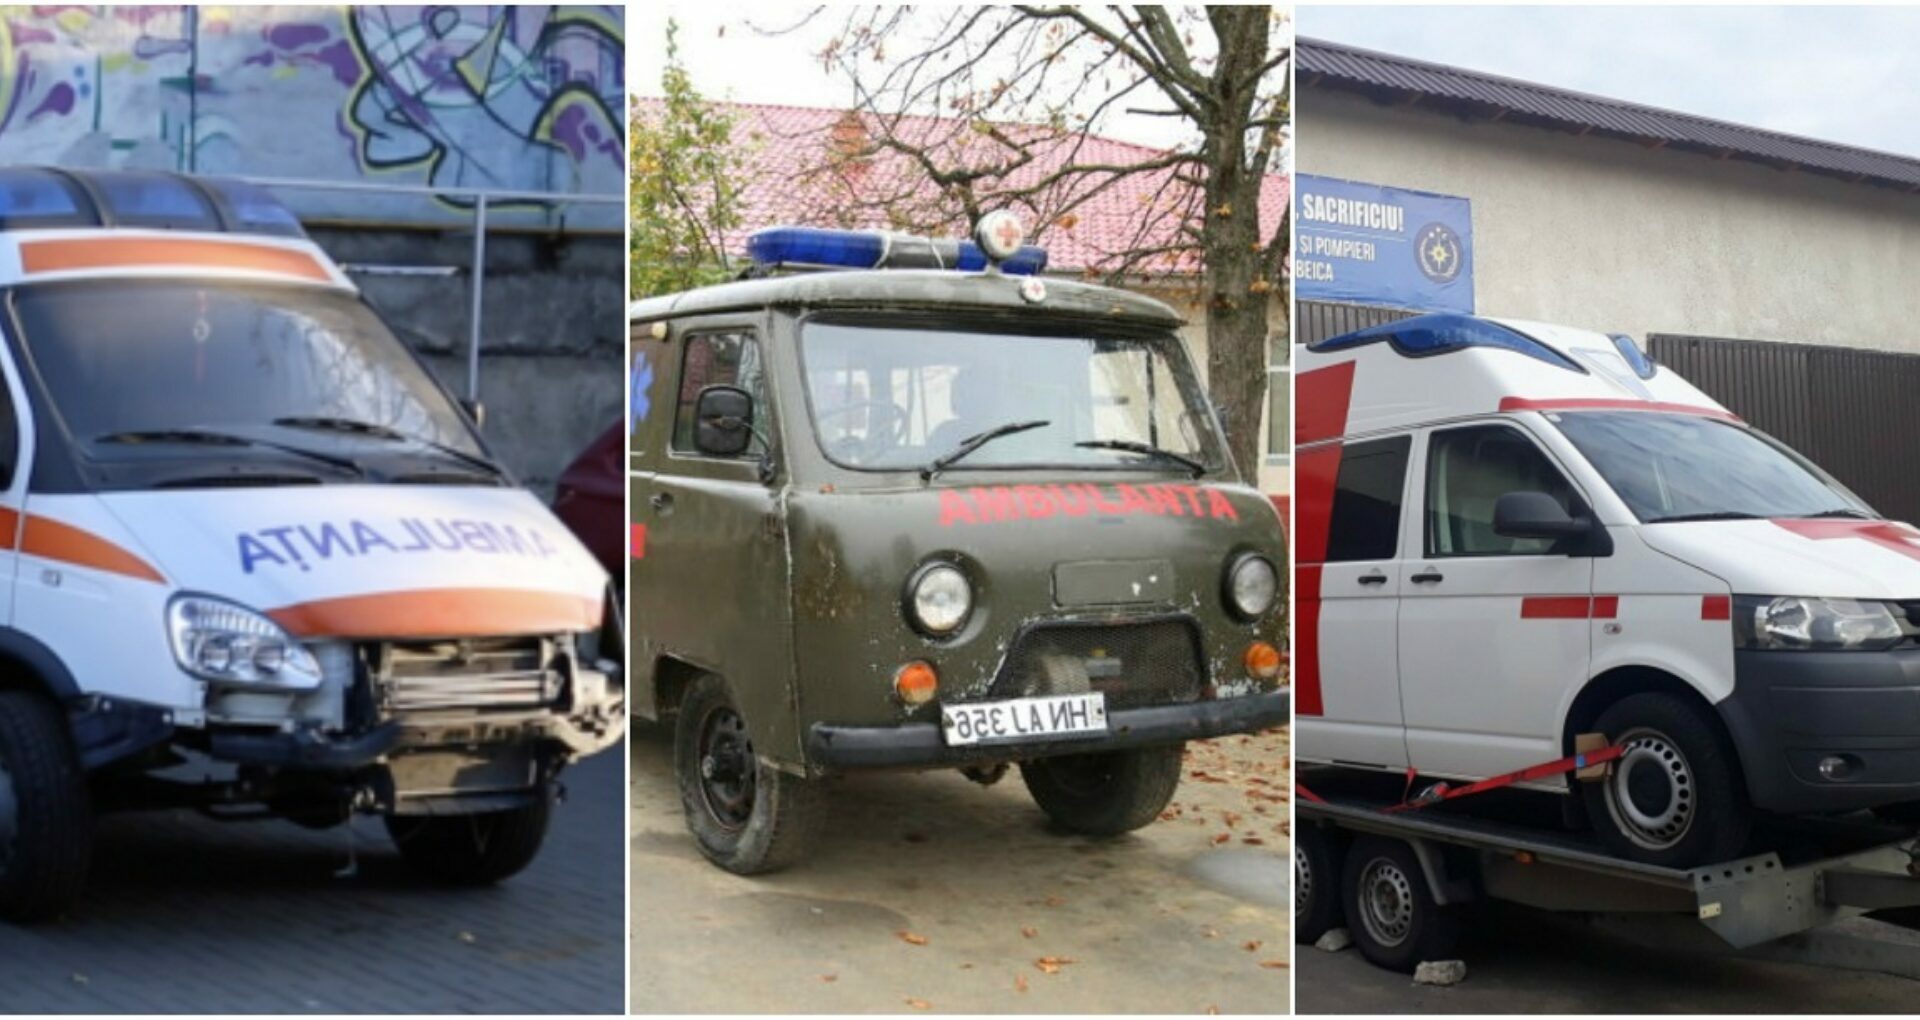 A Group of Moldovans Donated an Ambulance After the Ambulance Bought by the Authorities Broke Down